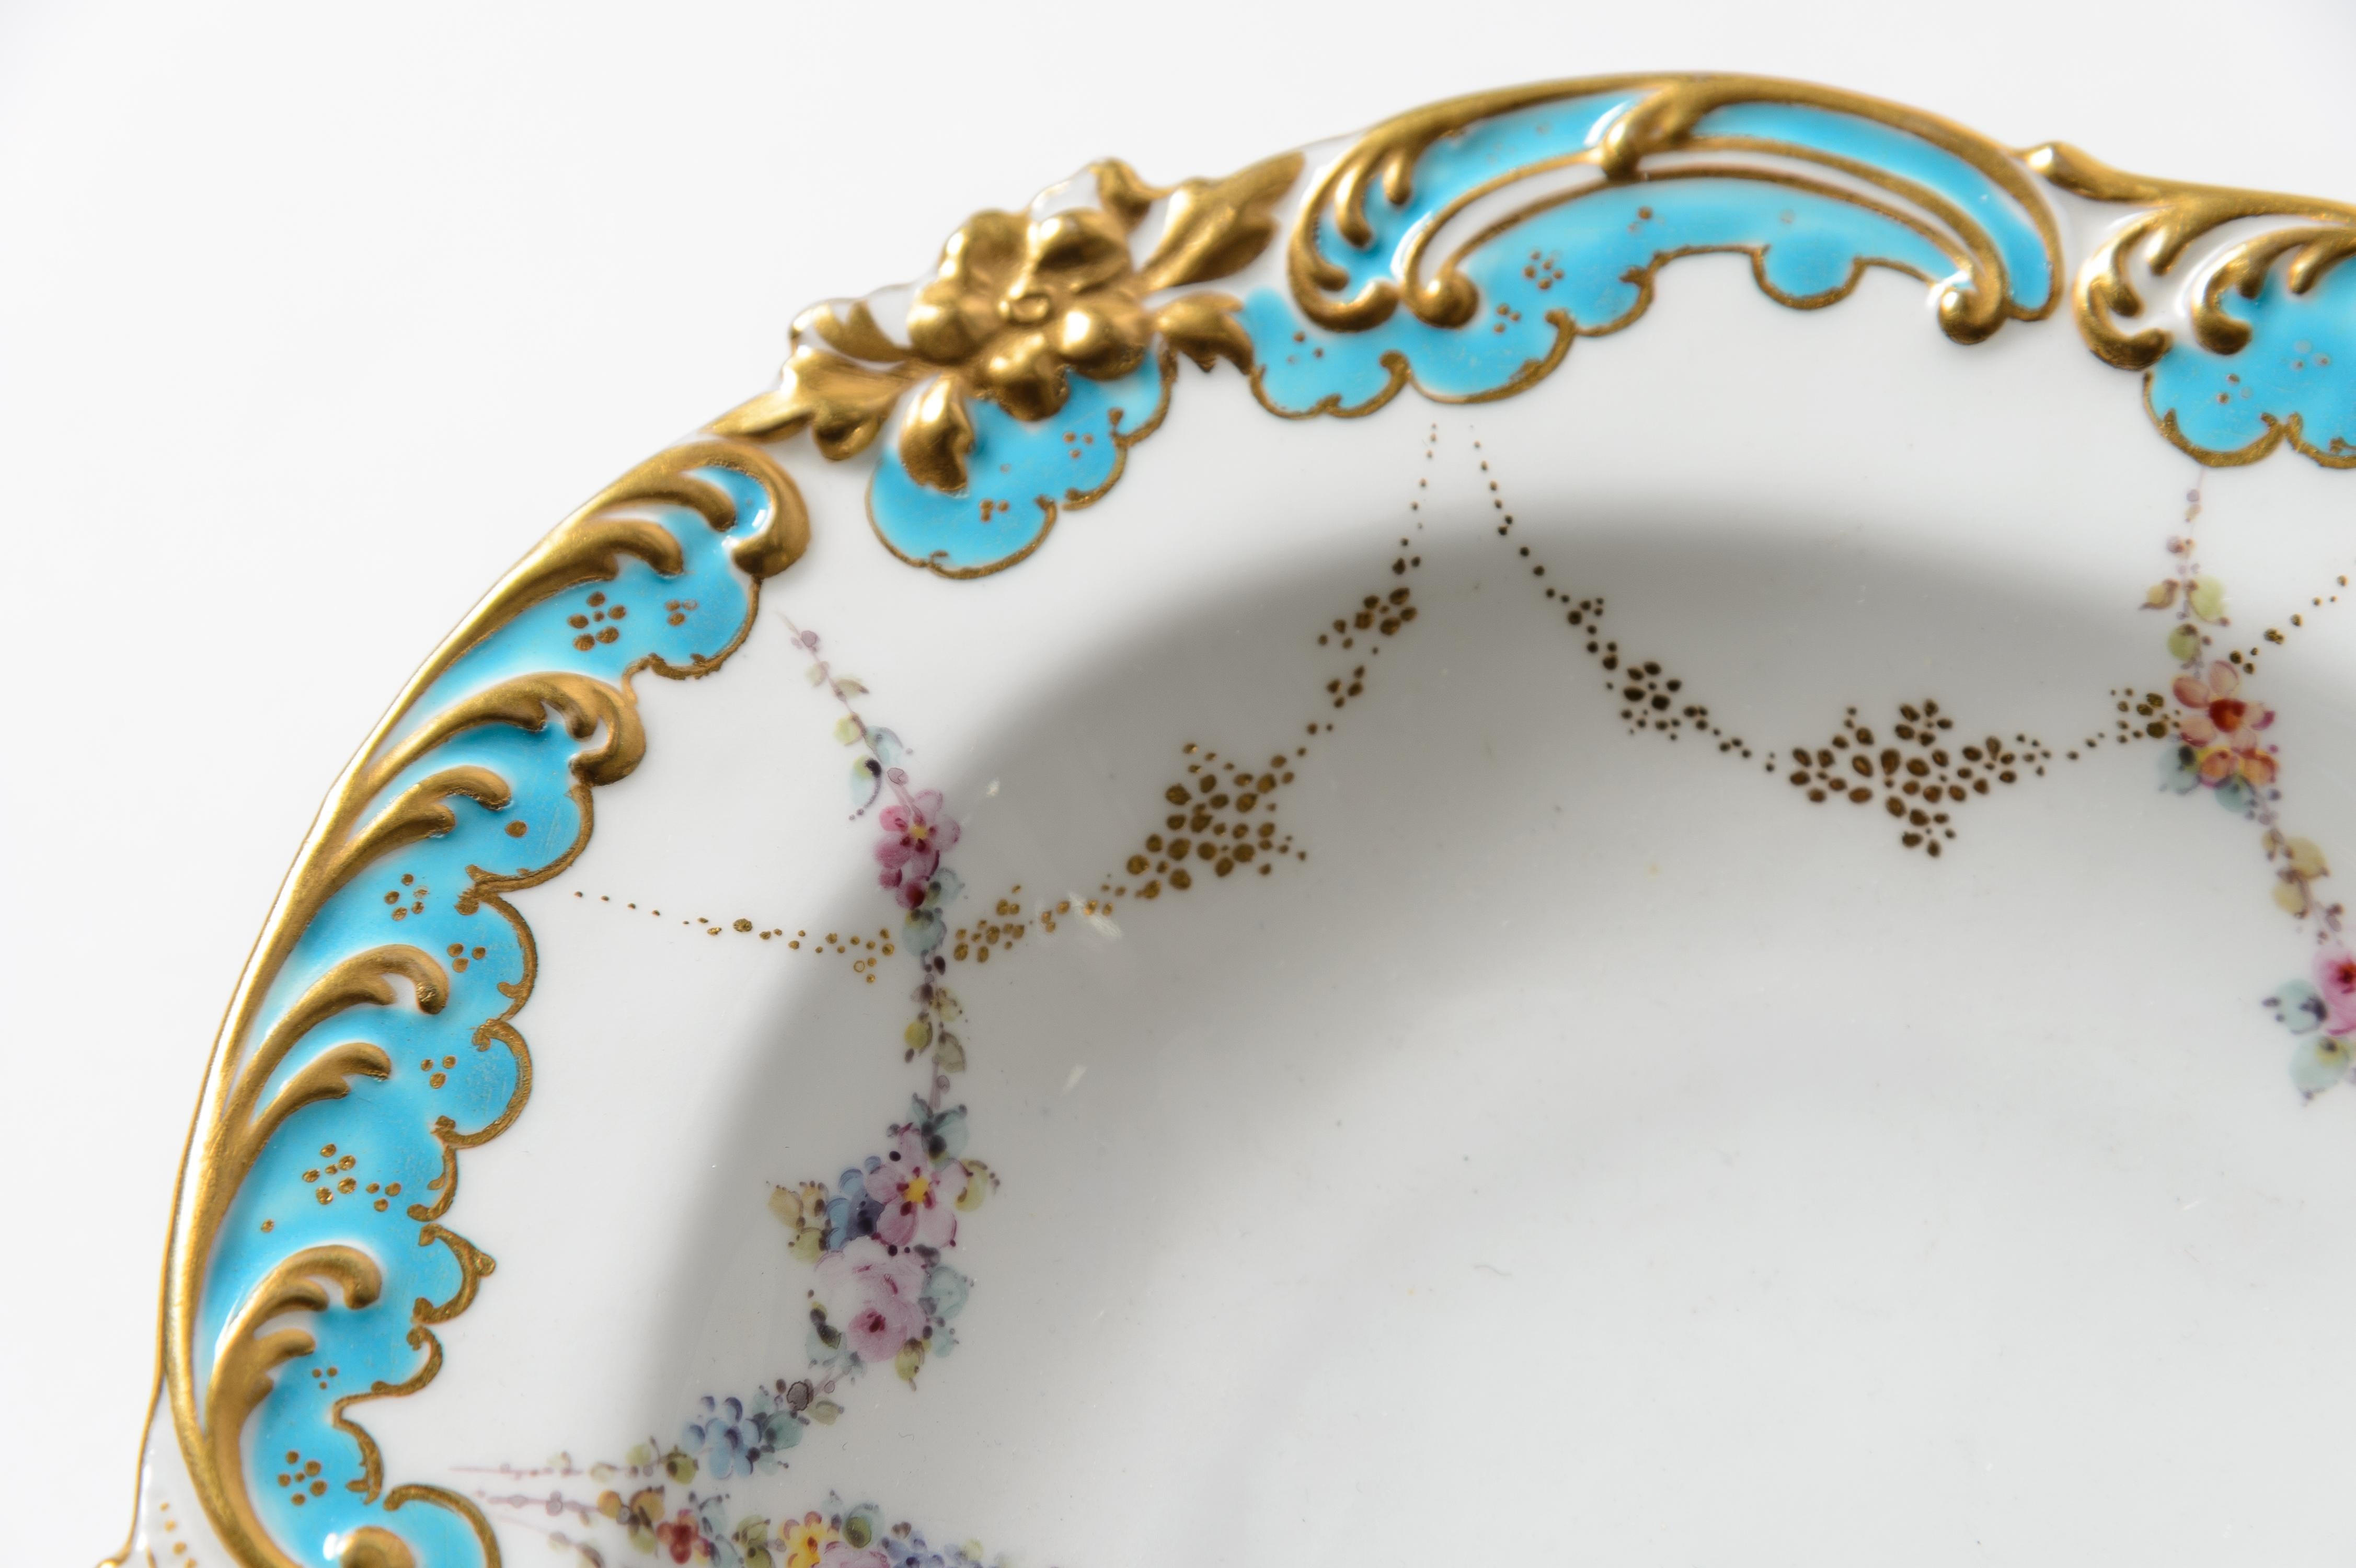 Antique Royal Crown Derby Pastry or Serving Dish, Turquoise & Gilt circa 1895 In Good Condition For Sale In West Palm Beach, FL